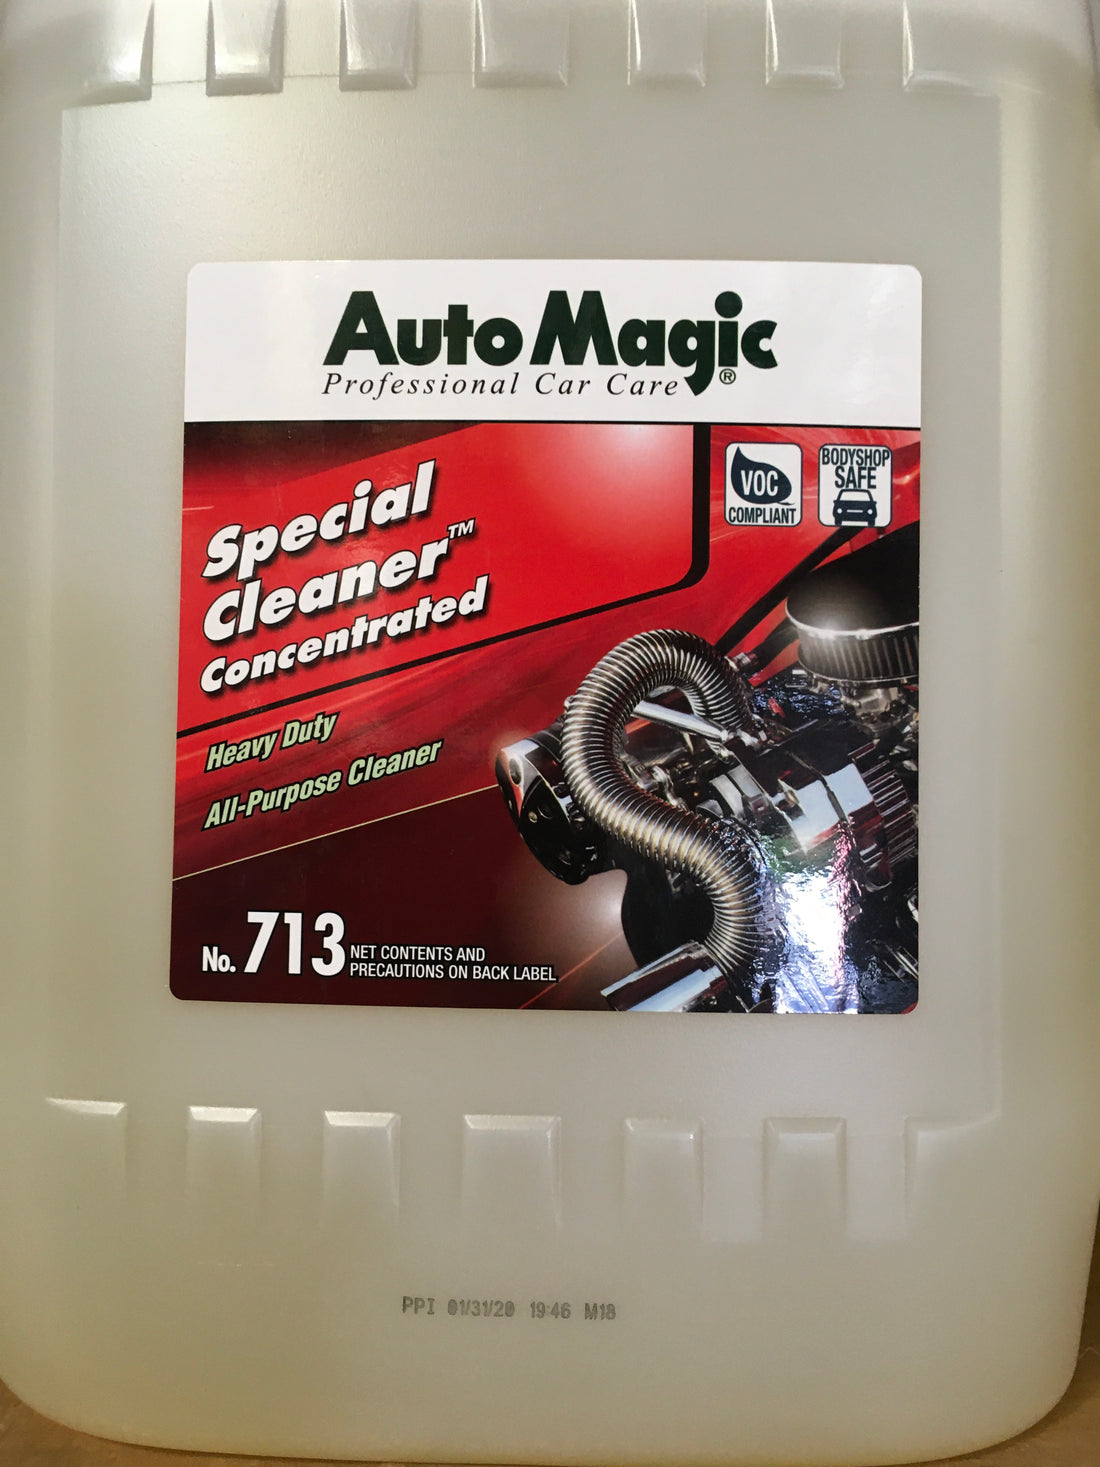 AutoMagic Special Cleaner Concentrate 5 Gal